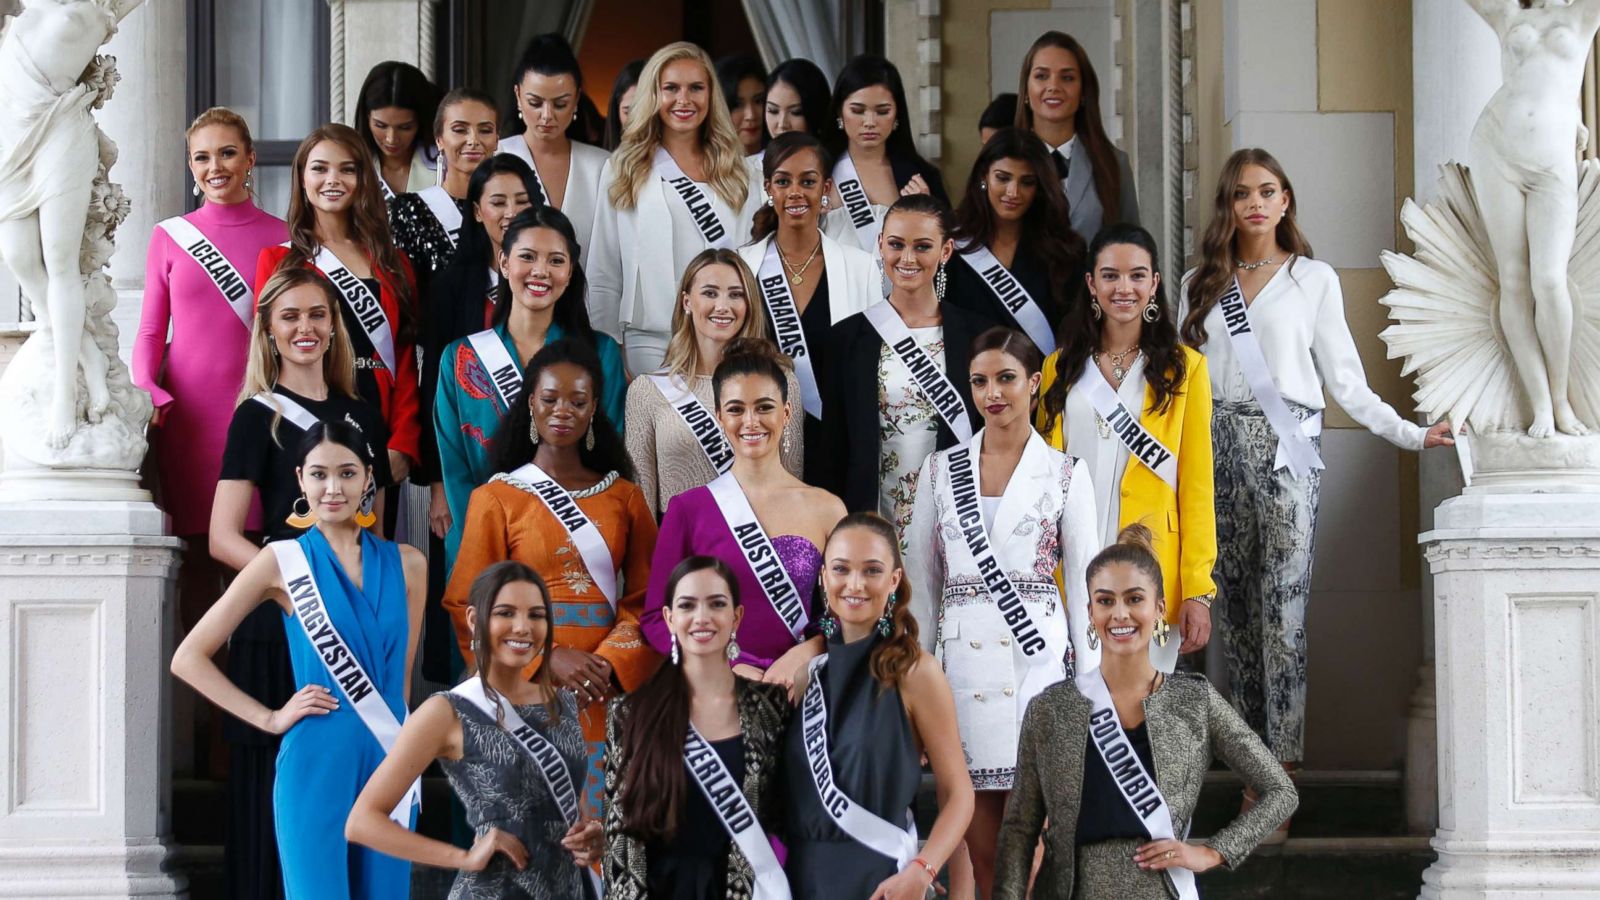 Miss Universe reveals 10 candidates who achieved significant jumps